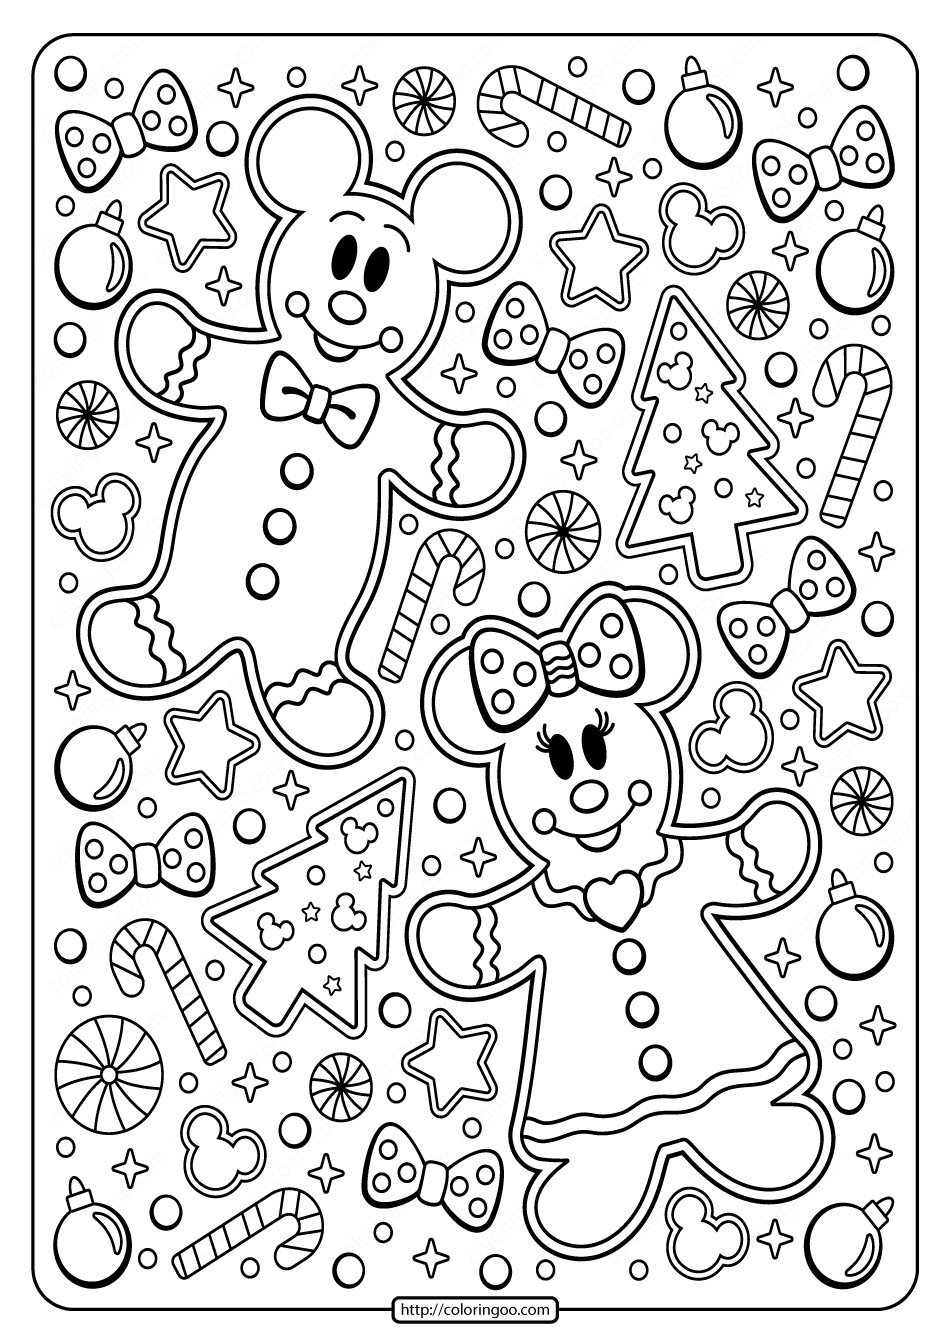 Printable Mickey – Minnie Mouse Holiday Coloring Page